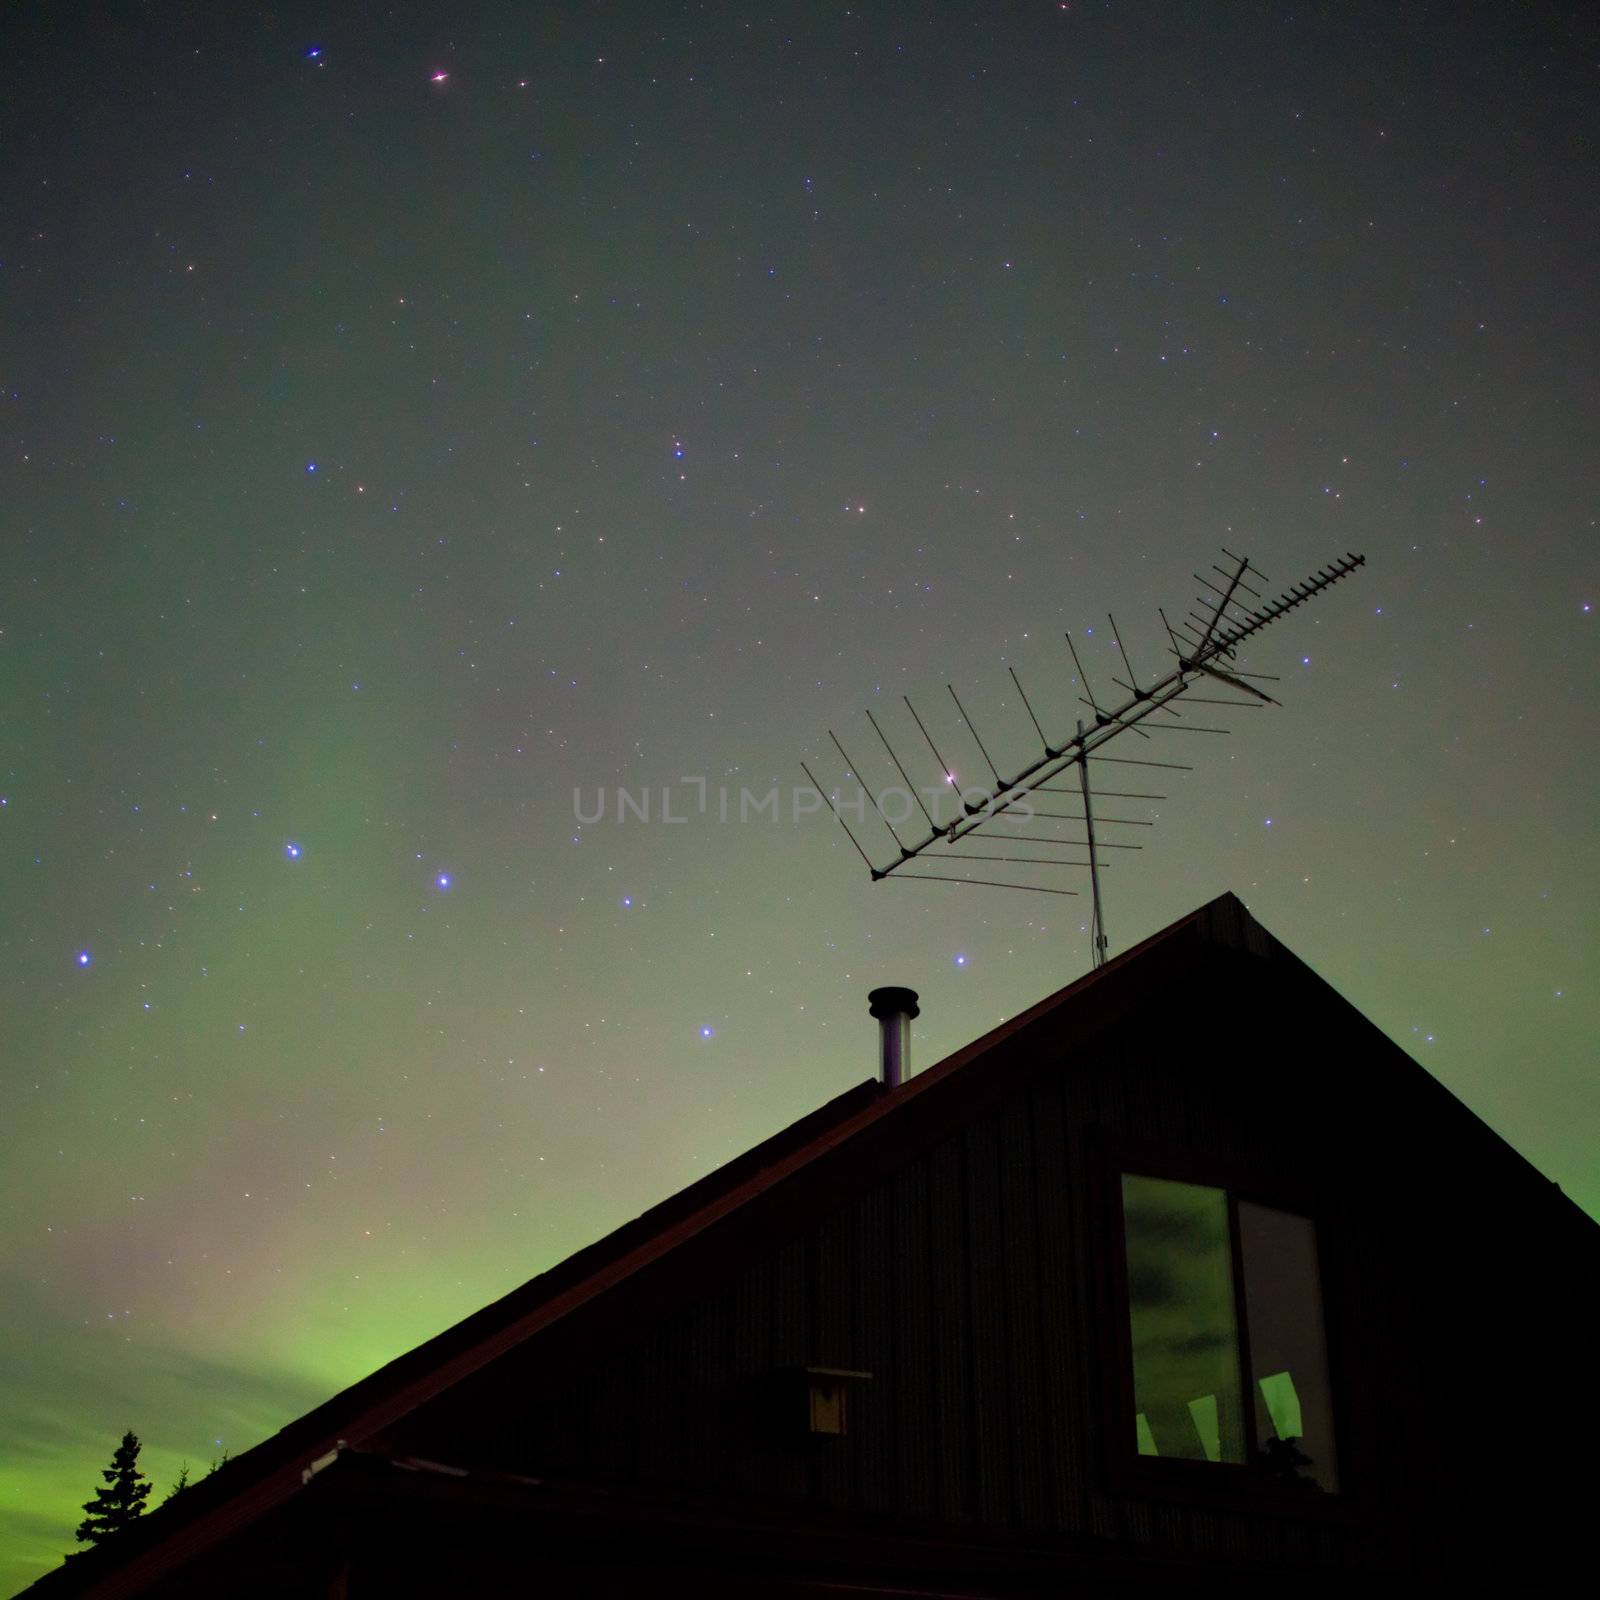 Bright northern lights (Aurora borealis) above house in northern Canada.